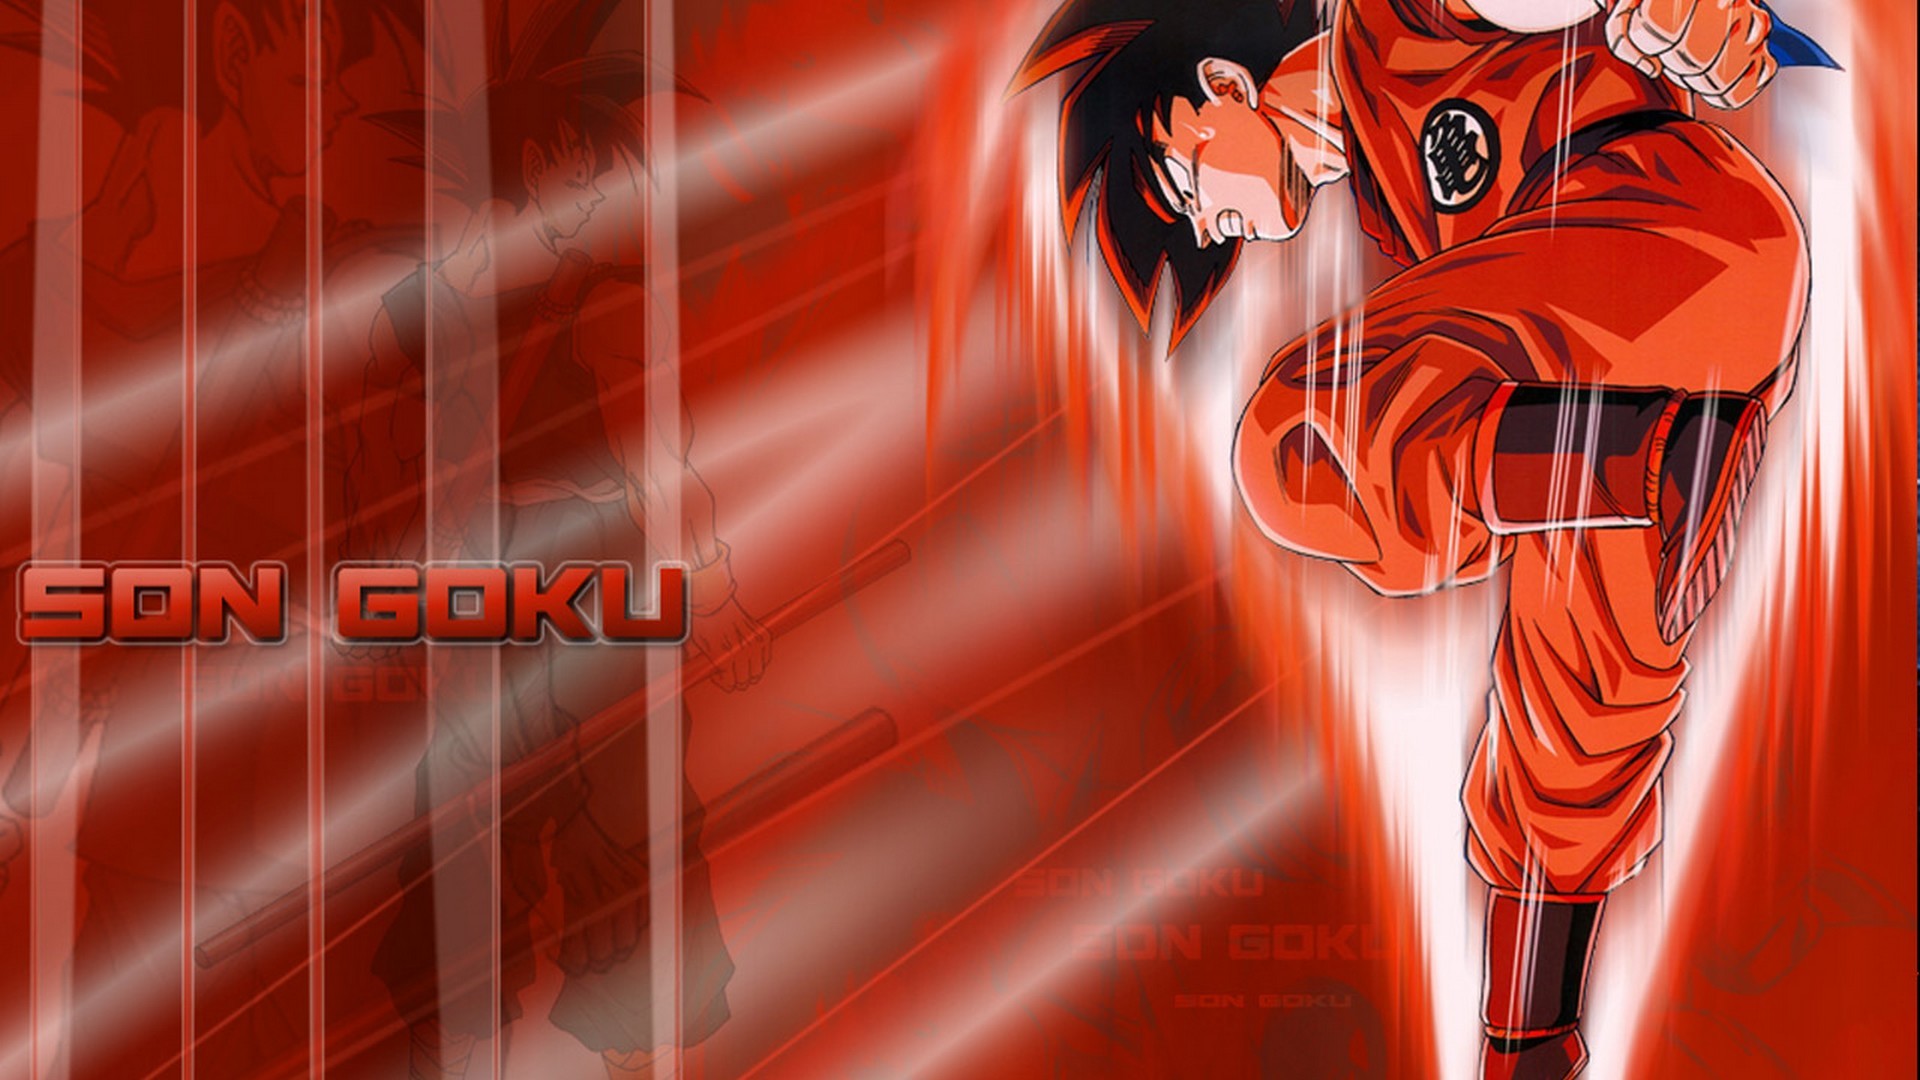 Goku Imagenes Desktop Backgrounds HD with resolution 1920X1080 pixel. You can use this wallpaper as background for your desktop Computer Screensavers, Android or iPhone smartphones